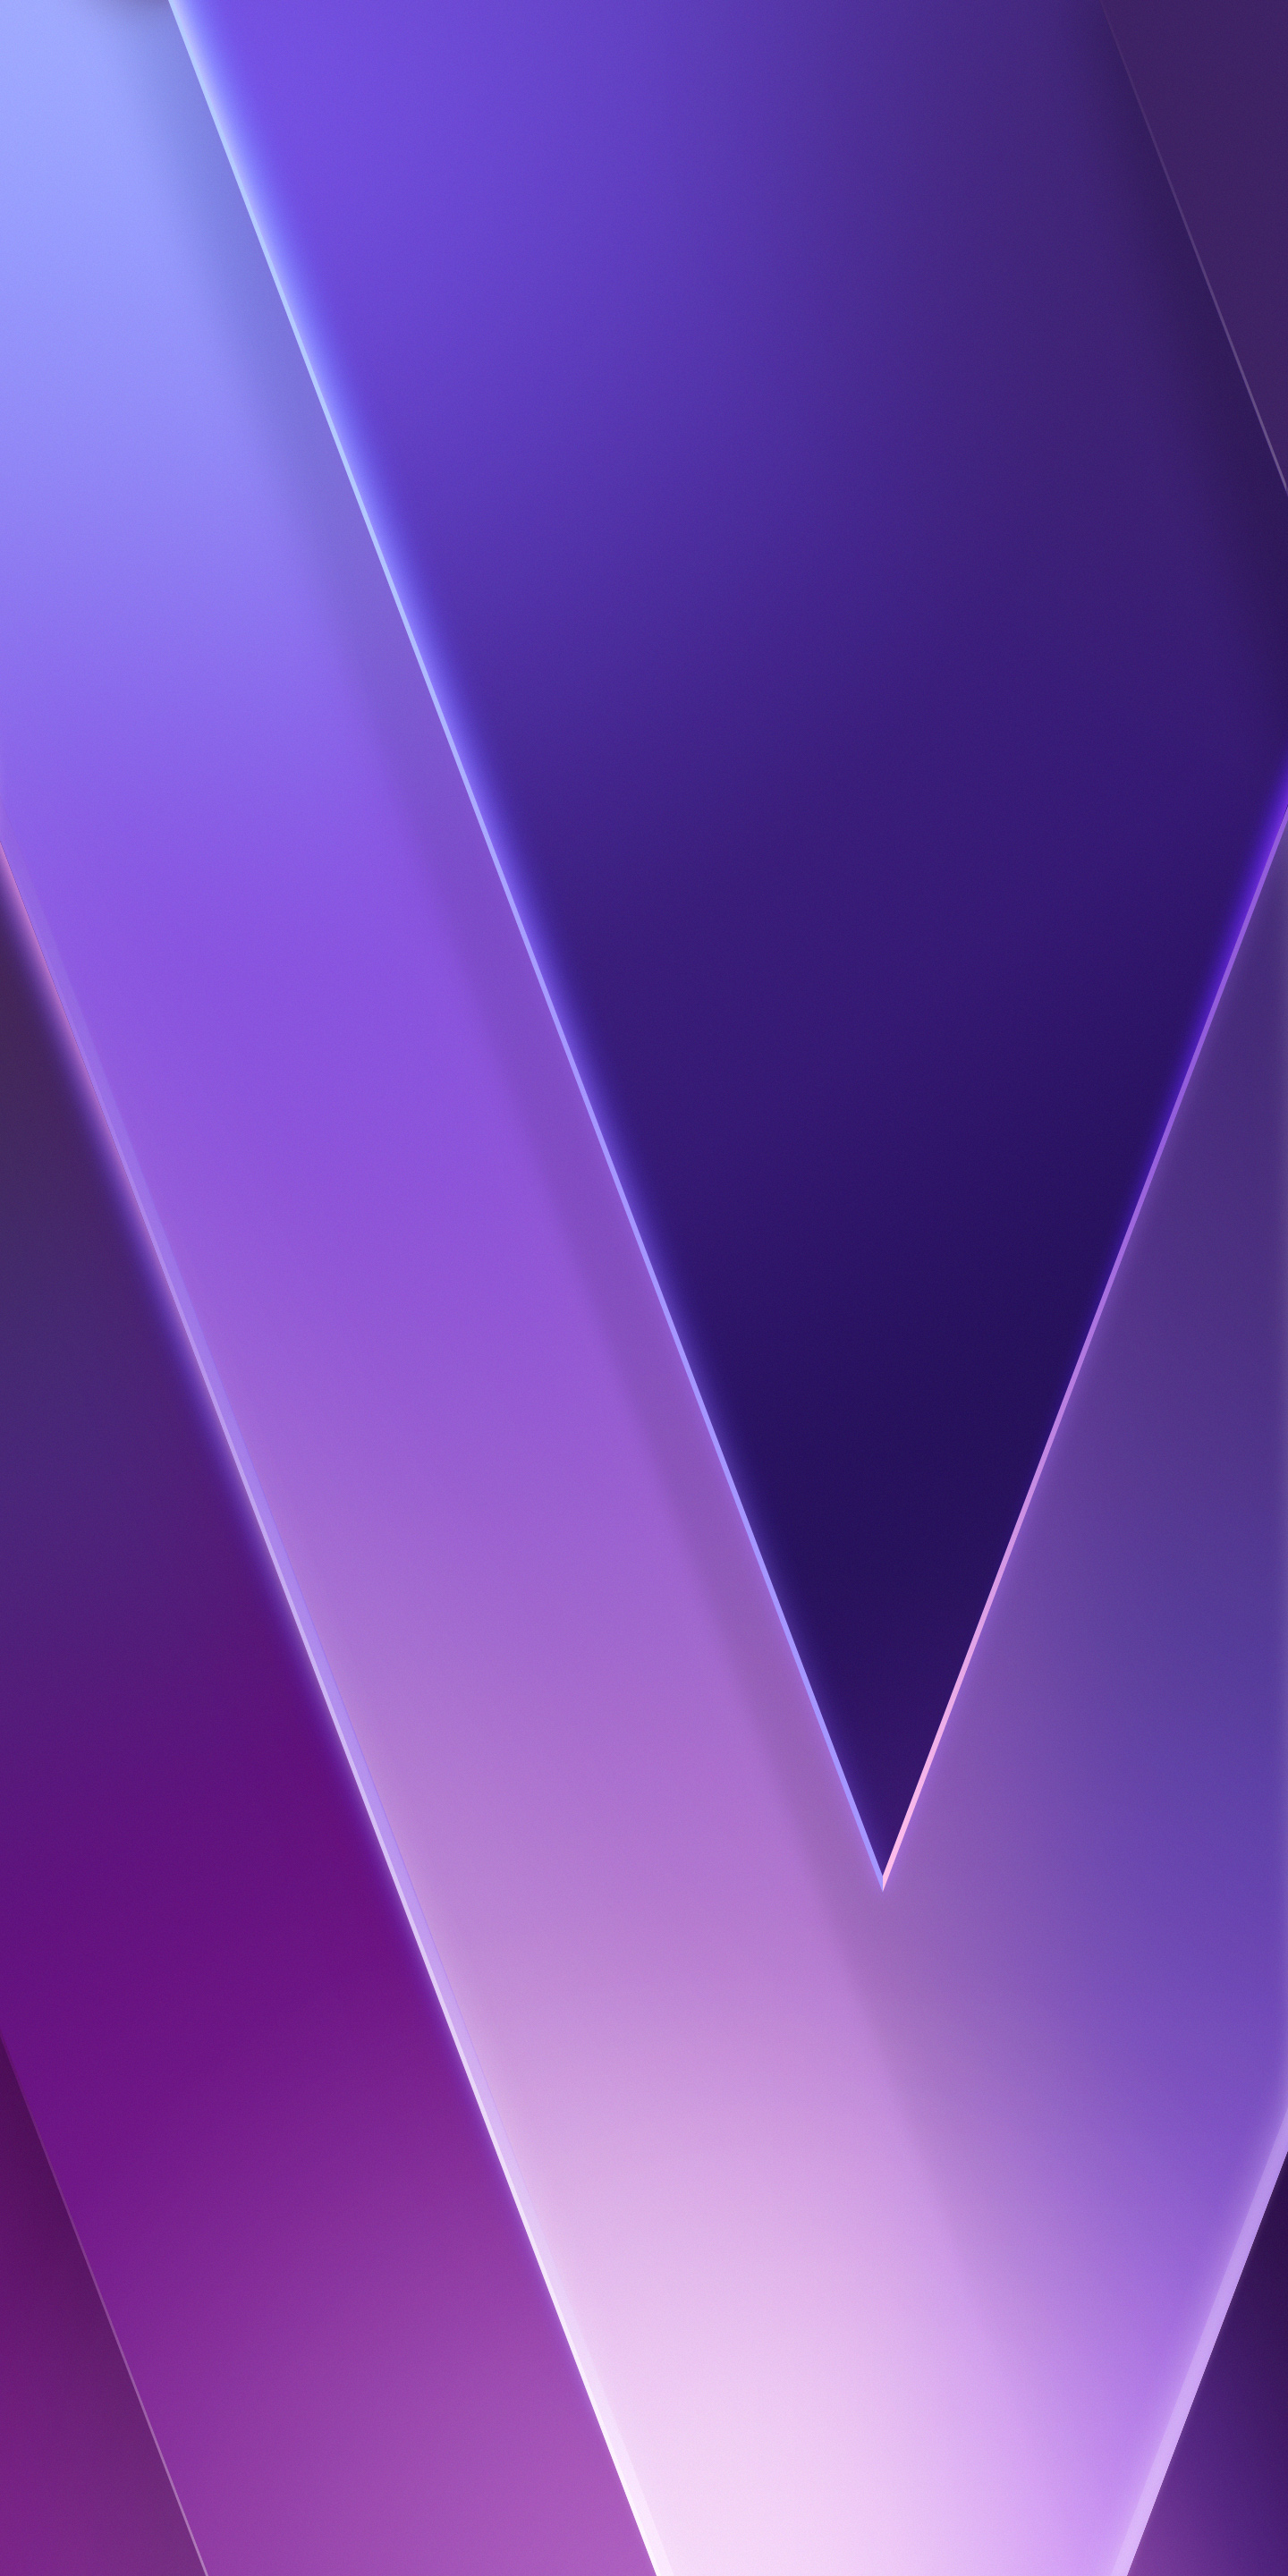 LG V30 wallpapers: download all of them